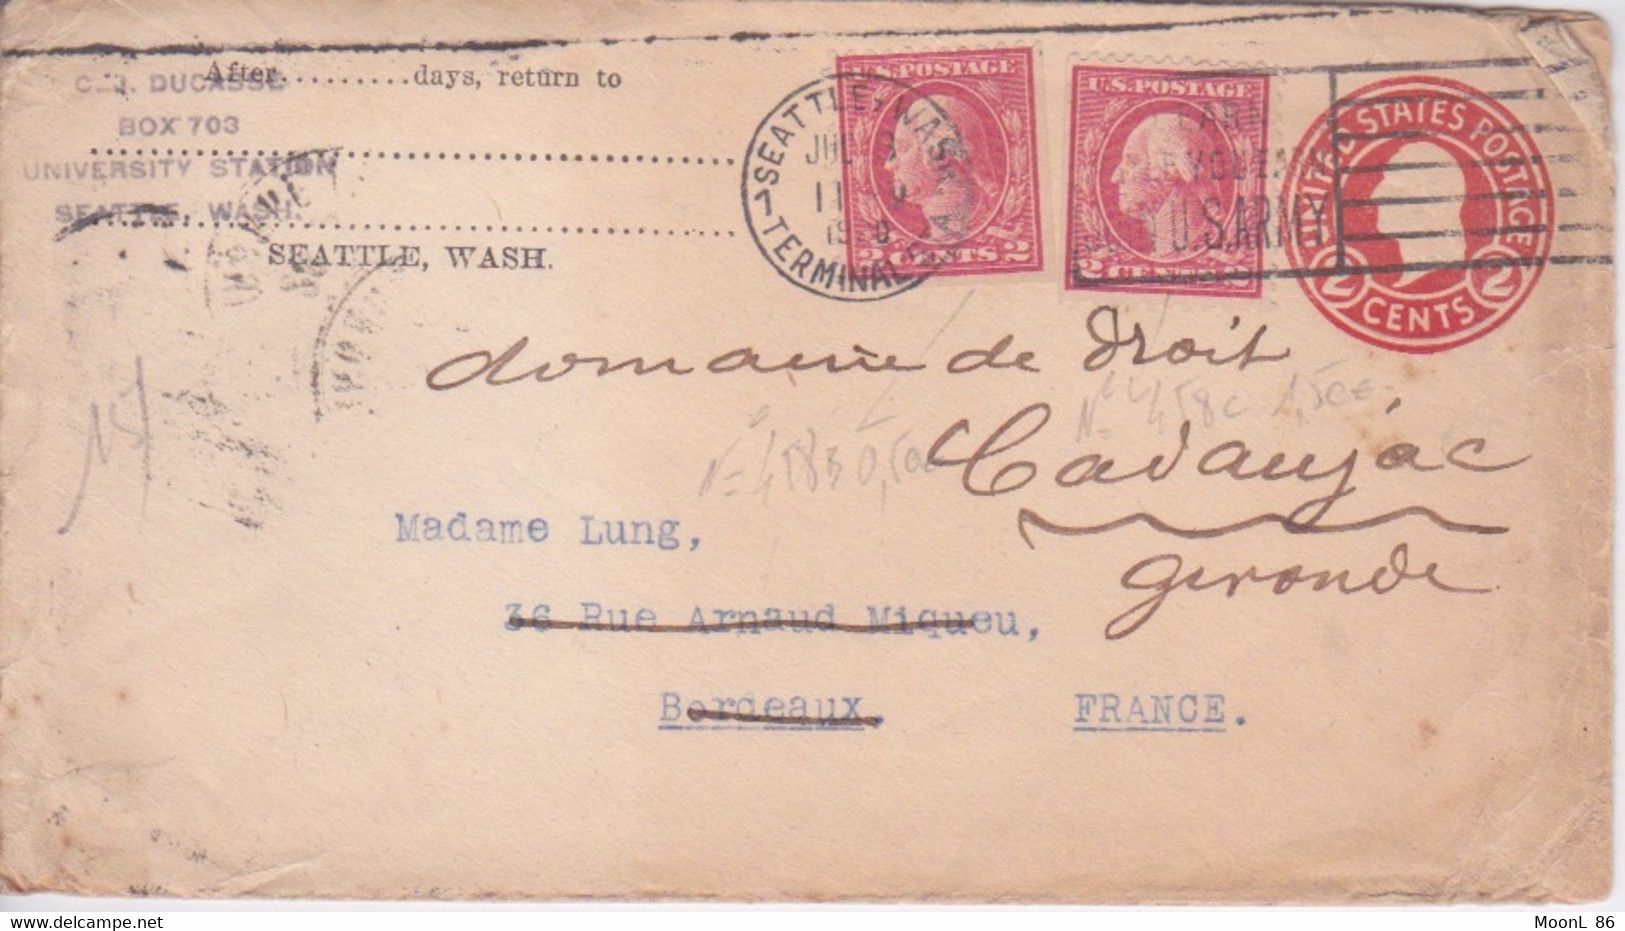 USA  - ENTIER POSTAL + TIMBRES - US.POSTAGE  2 CENTS - CACHET FLAMME SEATTLE WASH. - 1901-20